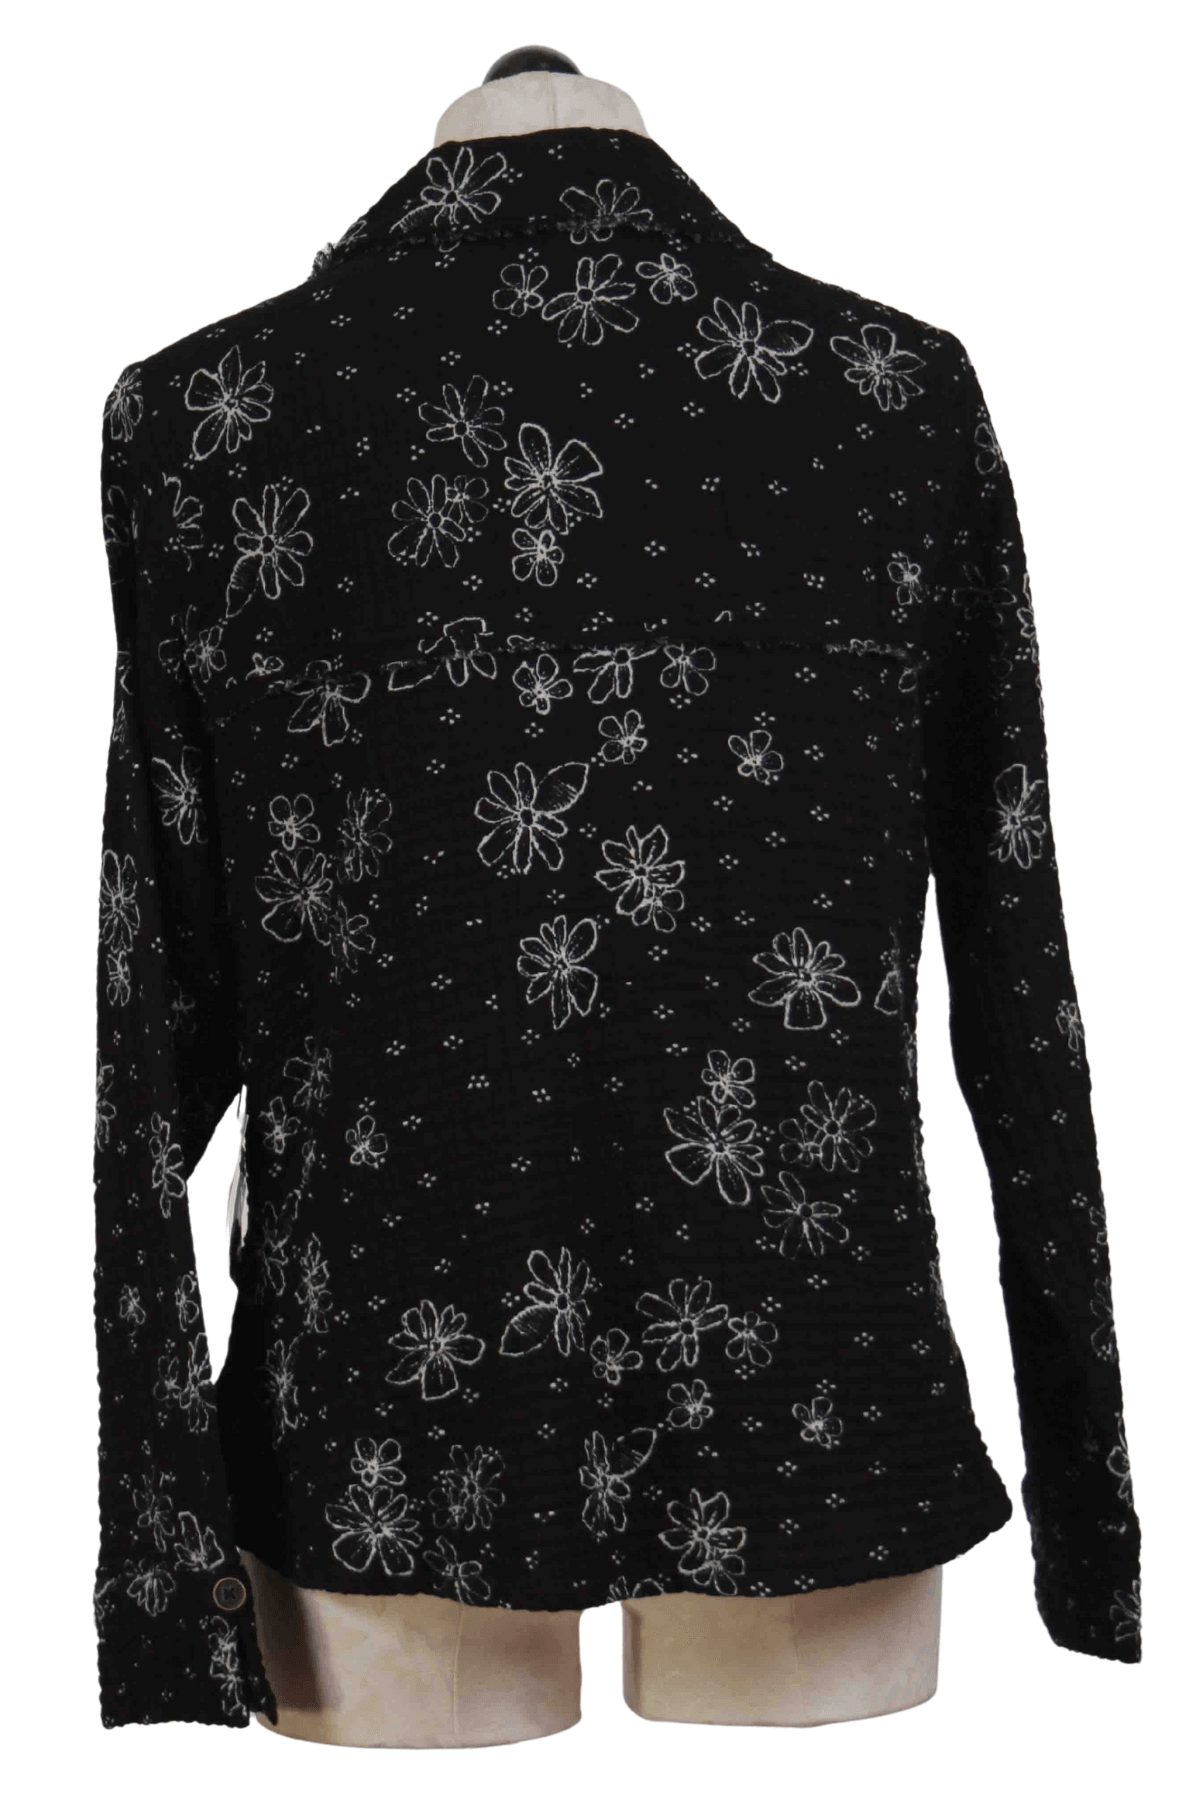 back view of black Floral Button Down Shaped Shirt by Habitat